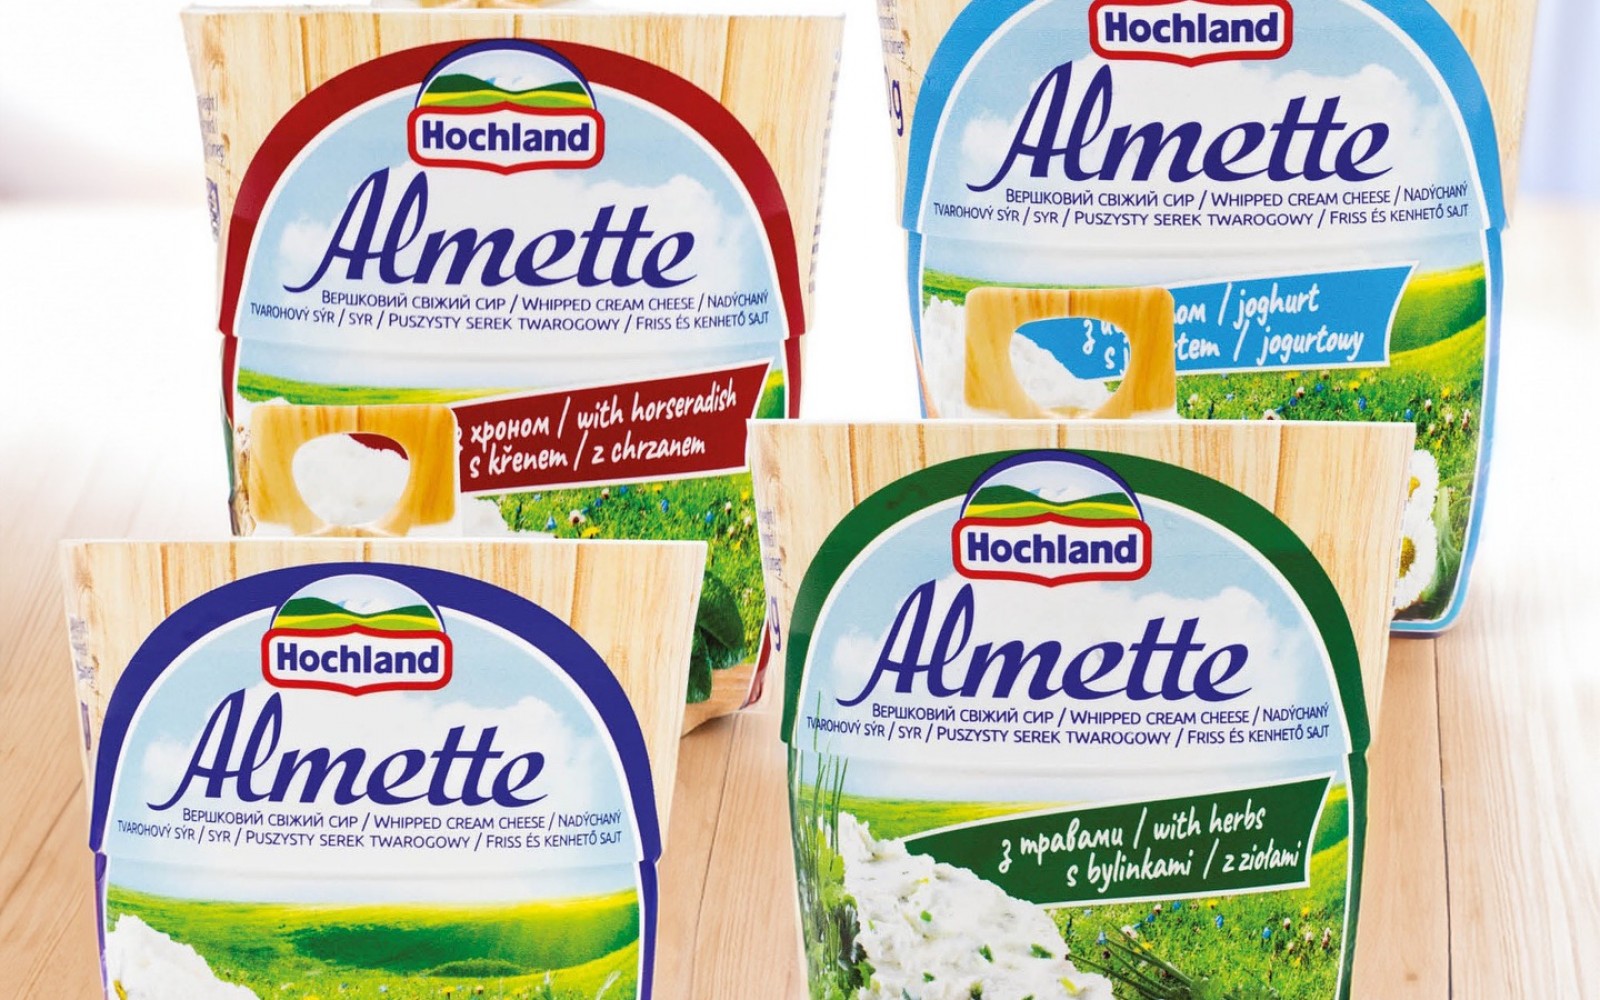 Almette cream cheeses are high-quality, fresh and tasty products that can be used in many ways.